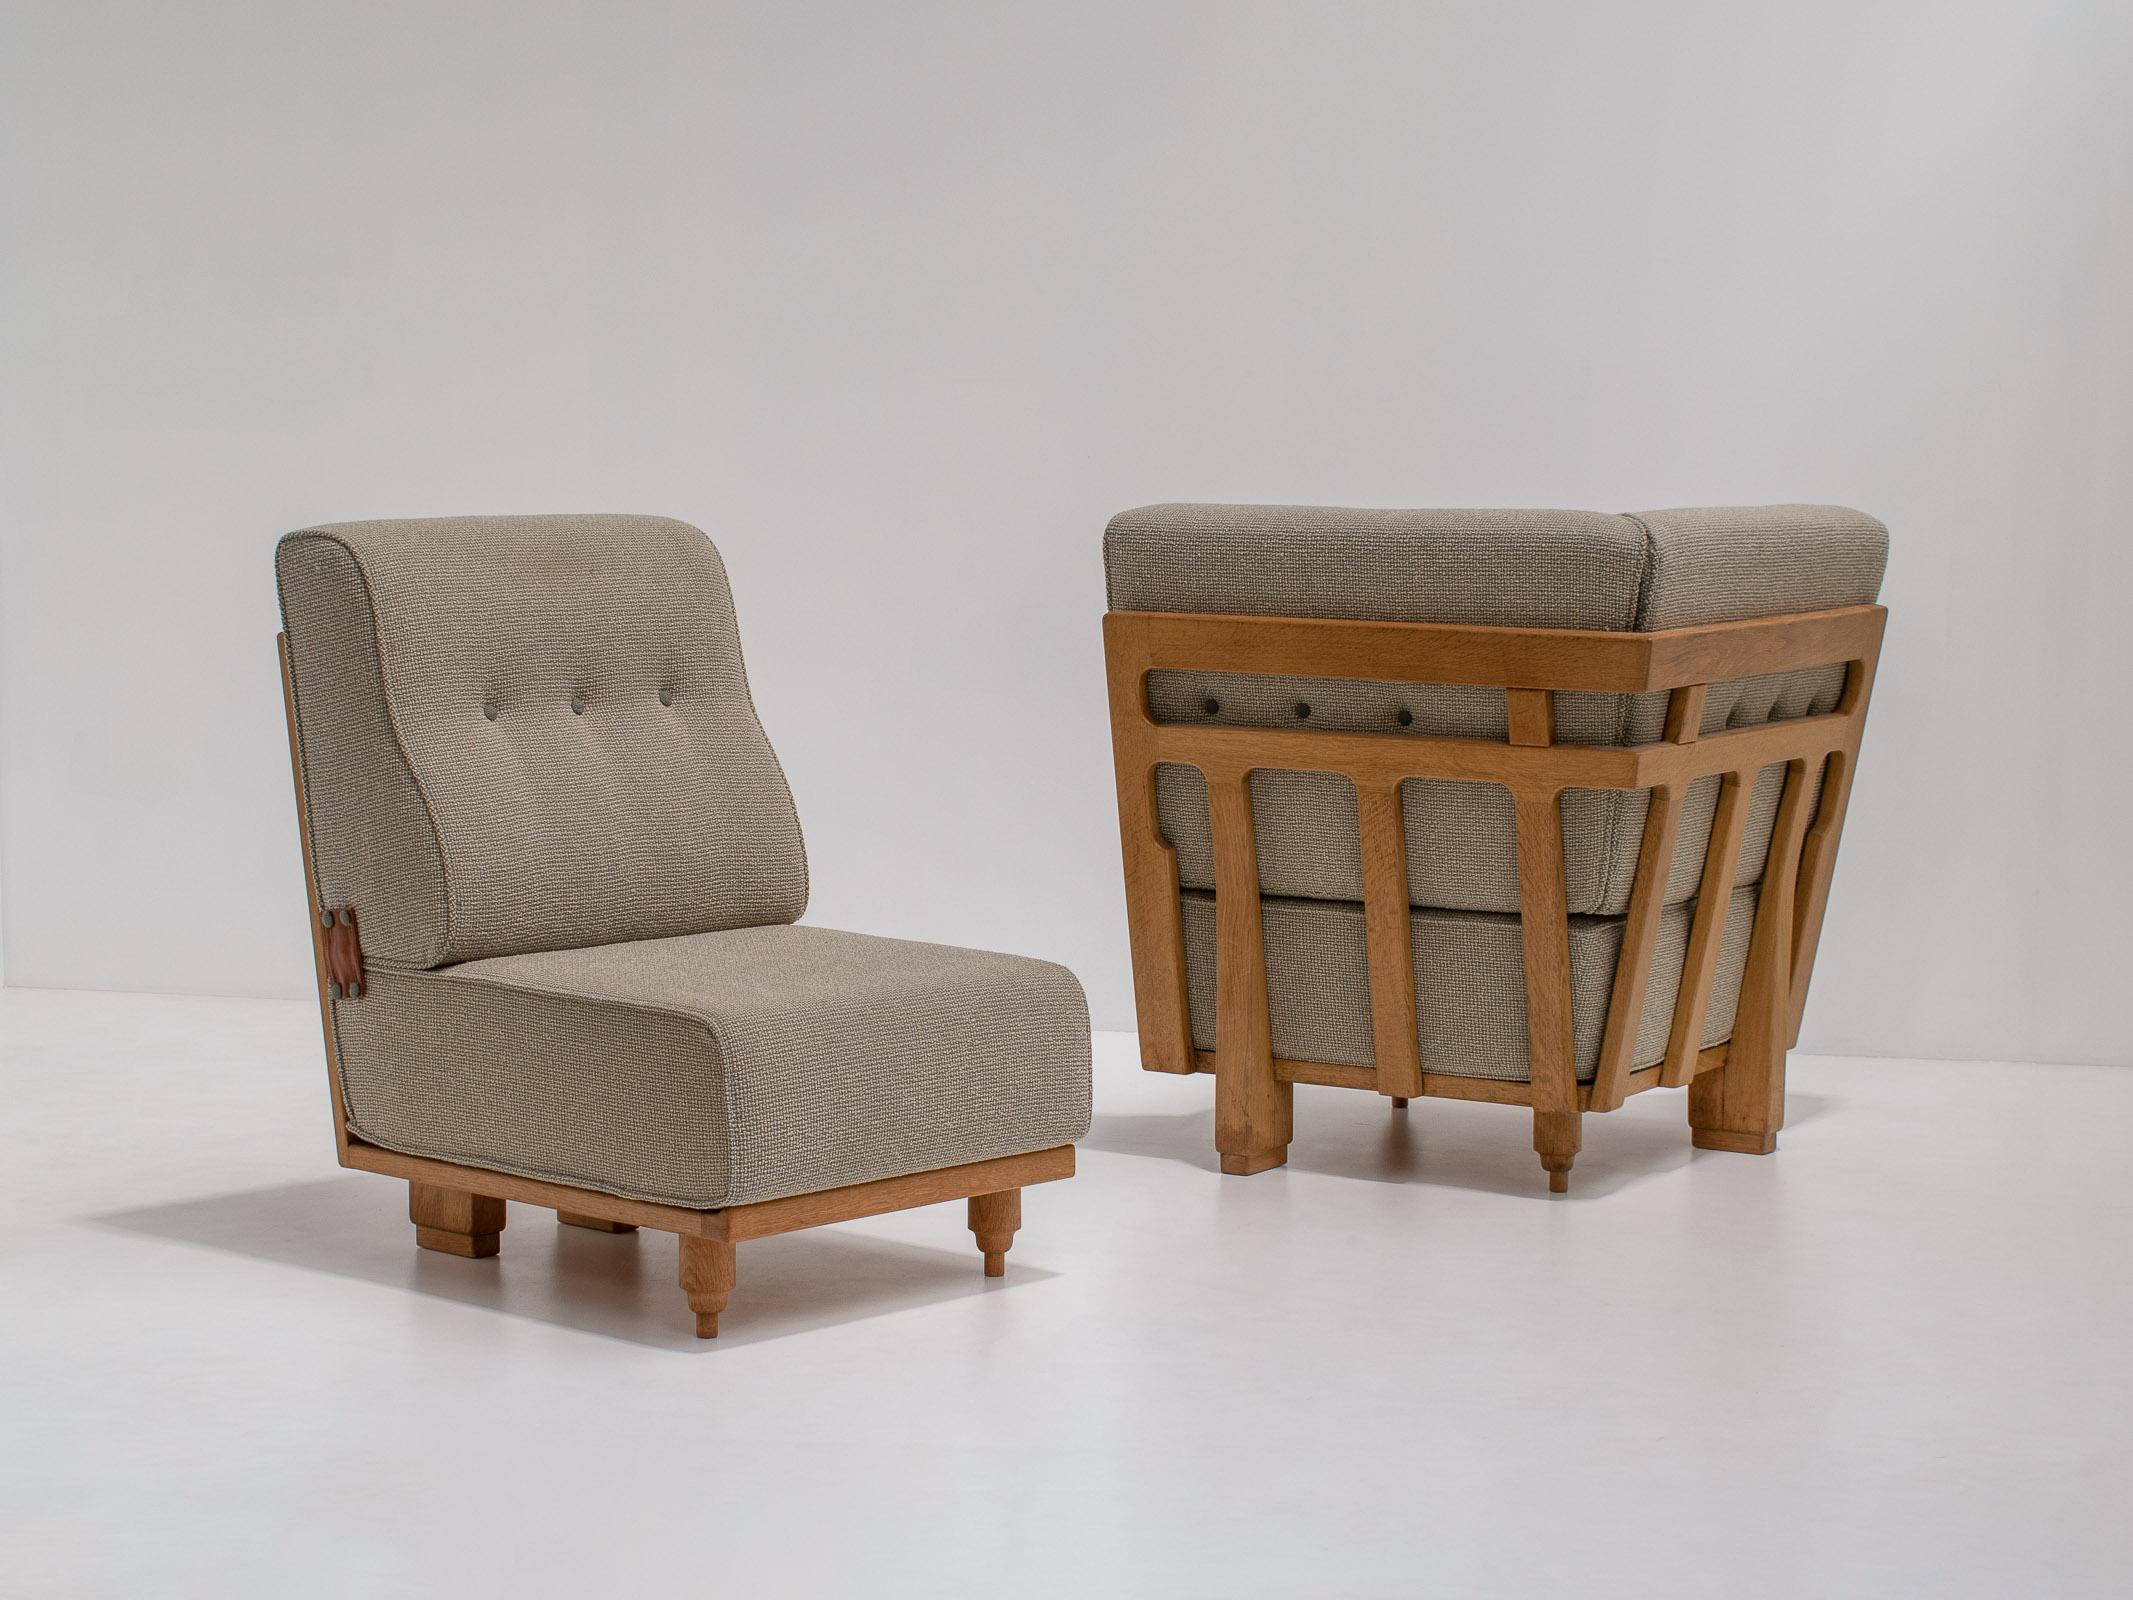 Set of two 'Elmyre' lounge chairs by Guillerme et Chambron, France, 1960s

What is typical for the designs of Guillerme et Chambron, is the sculptural frames, the natural materials and the plush cushions. What makes these extra special is their low